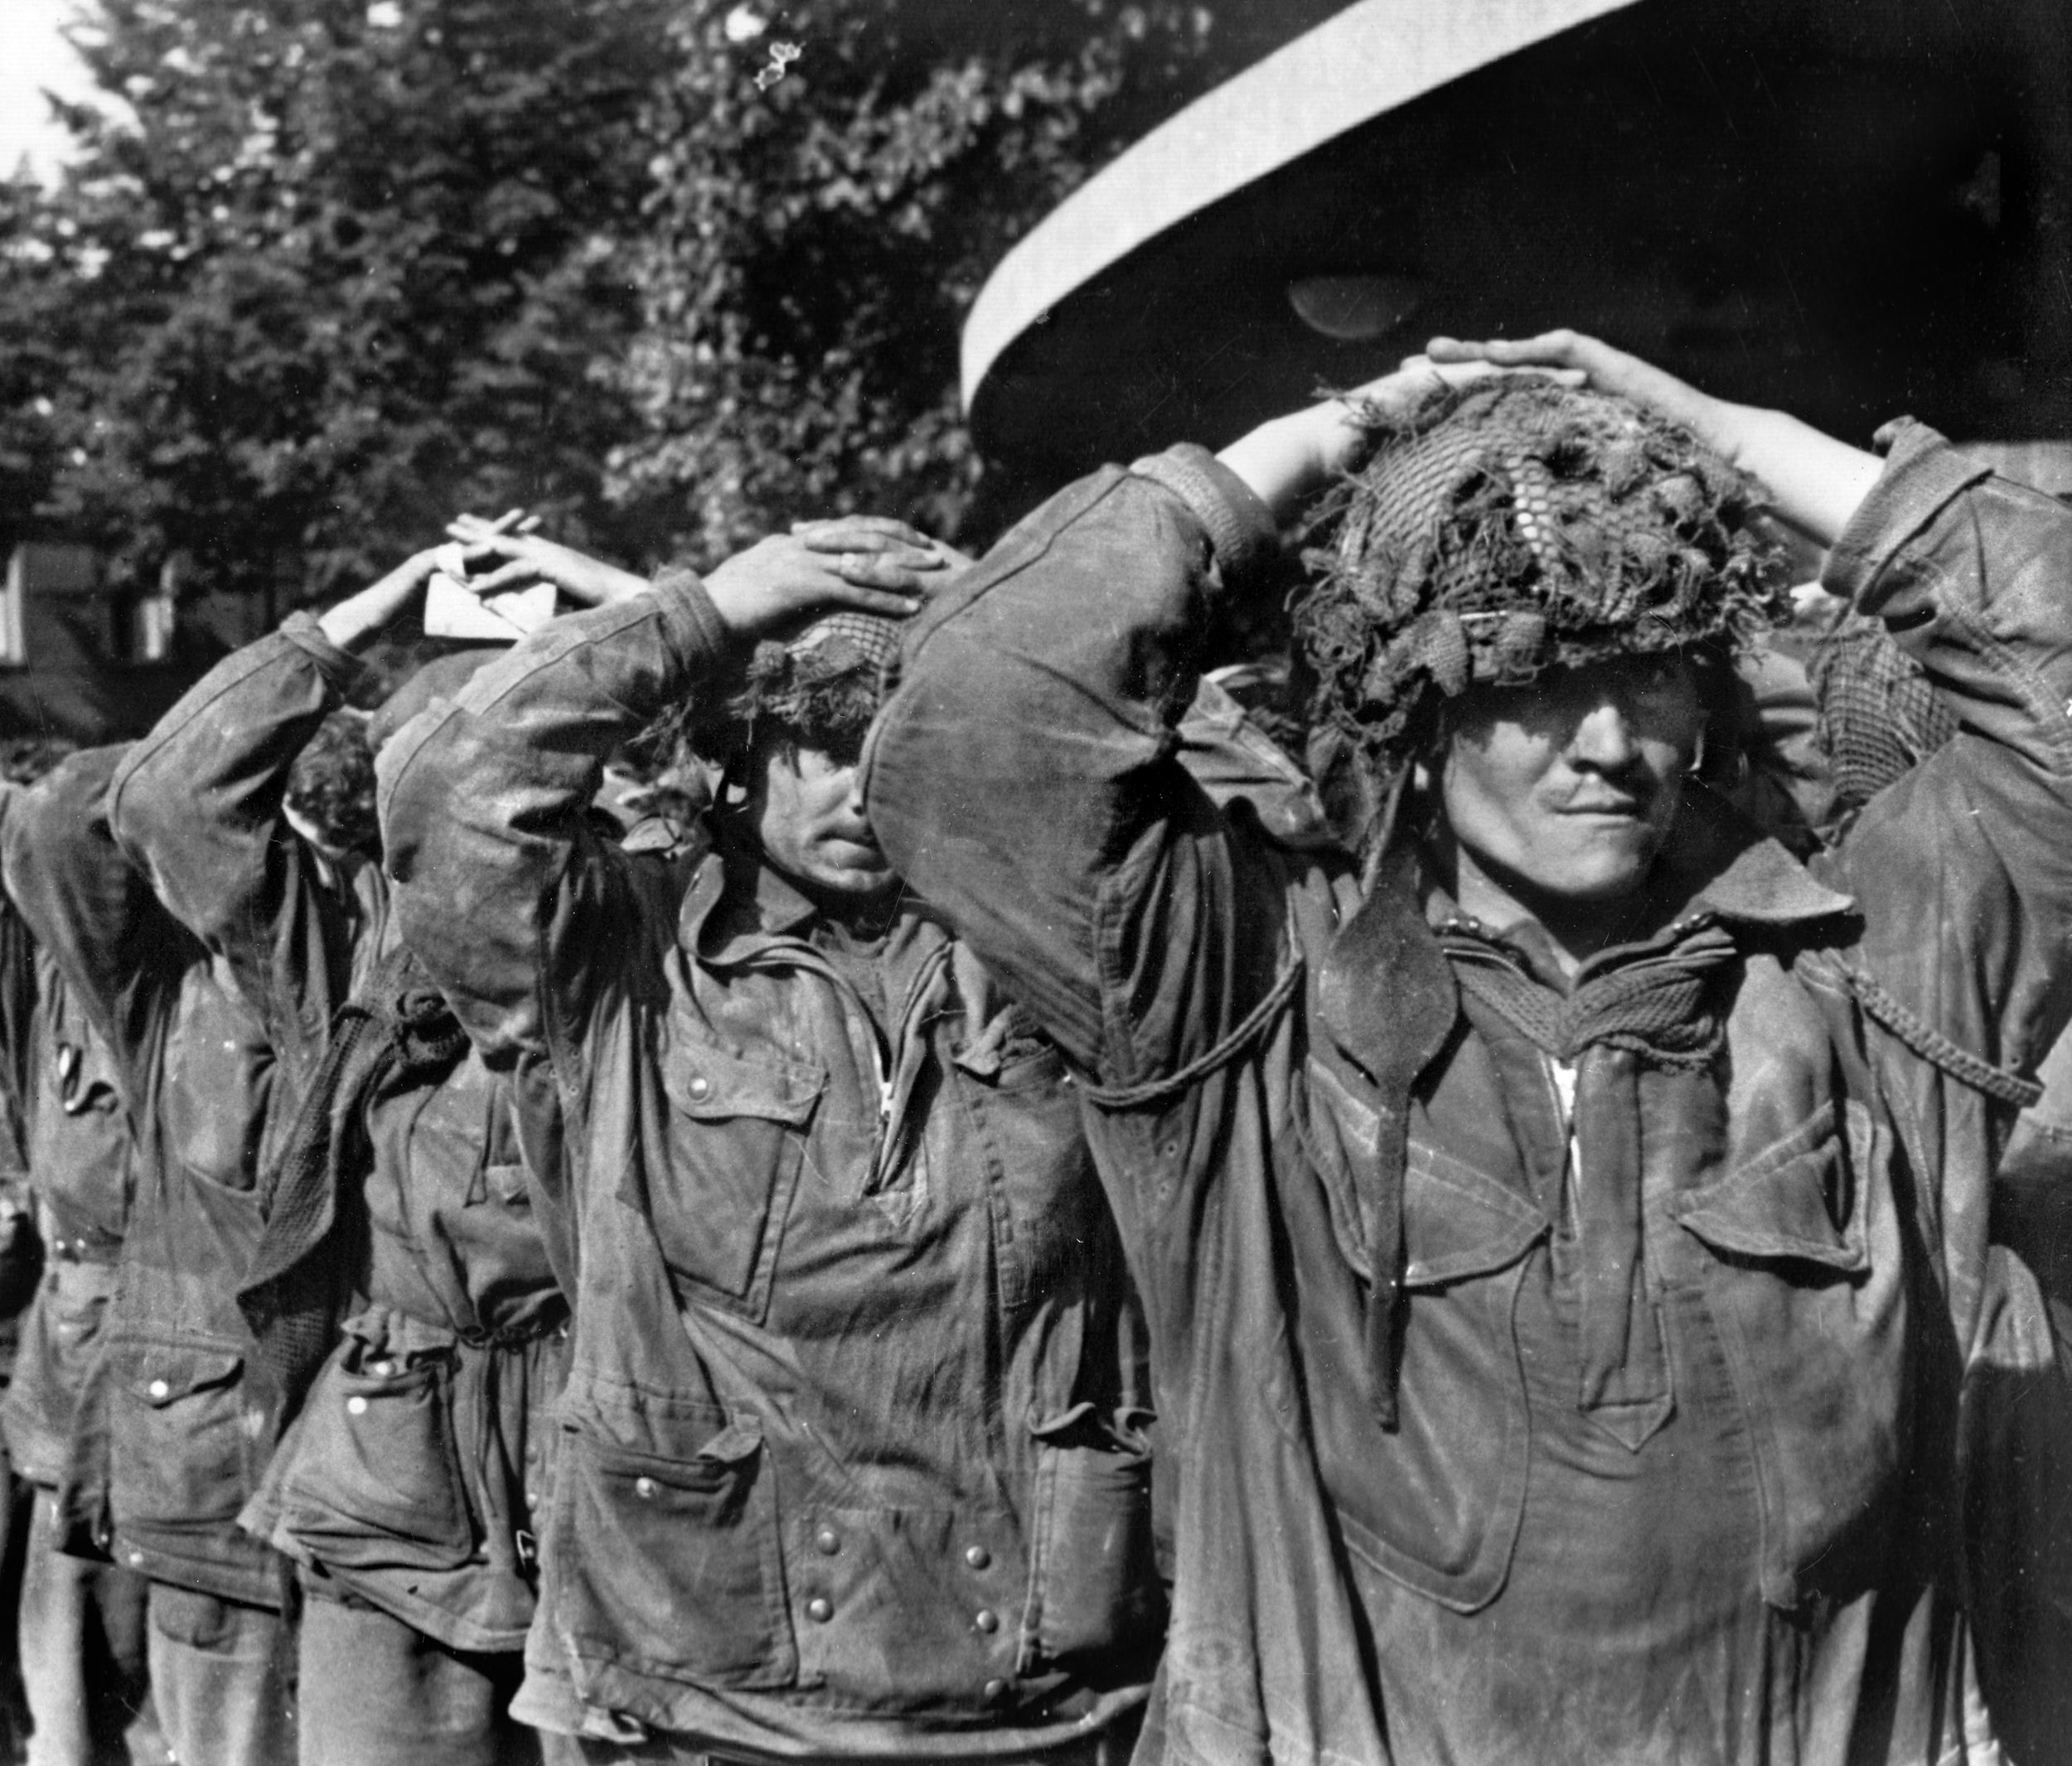 Their hands on their heads, British paratroopers of the 1st Airborne Division taken prisoner at Arnhem are marched into captivity. The failed attempt to seize the bridge across the Lower Rhine at the Dutch town sealed the fate of Operation Market-Garden.